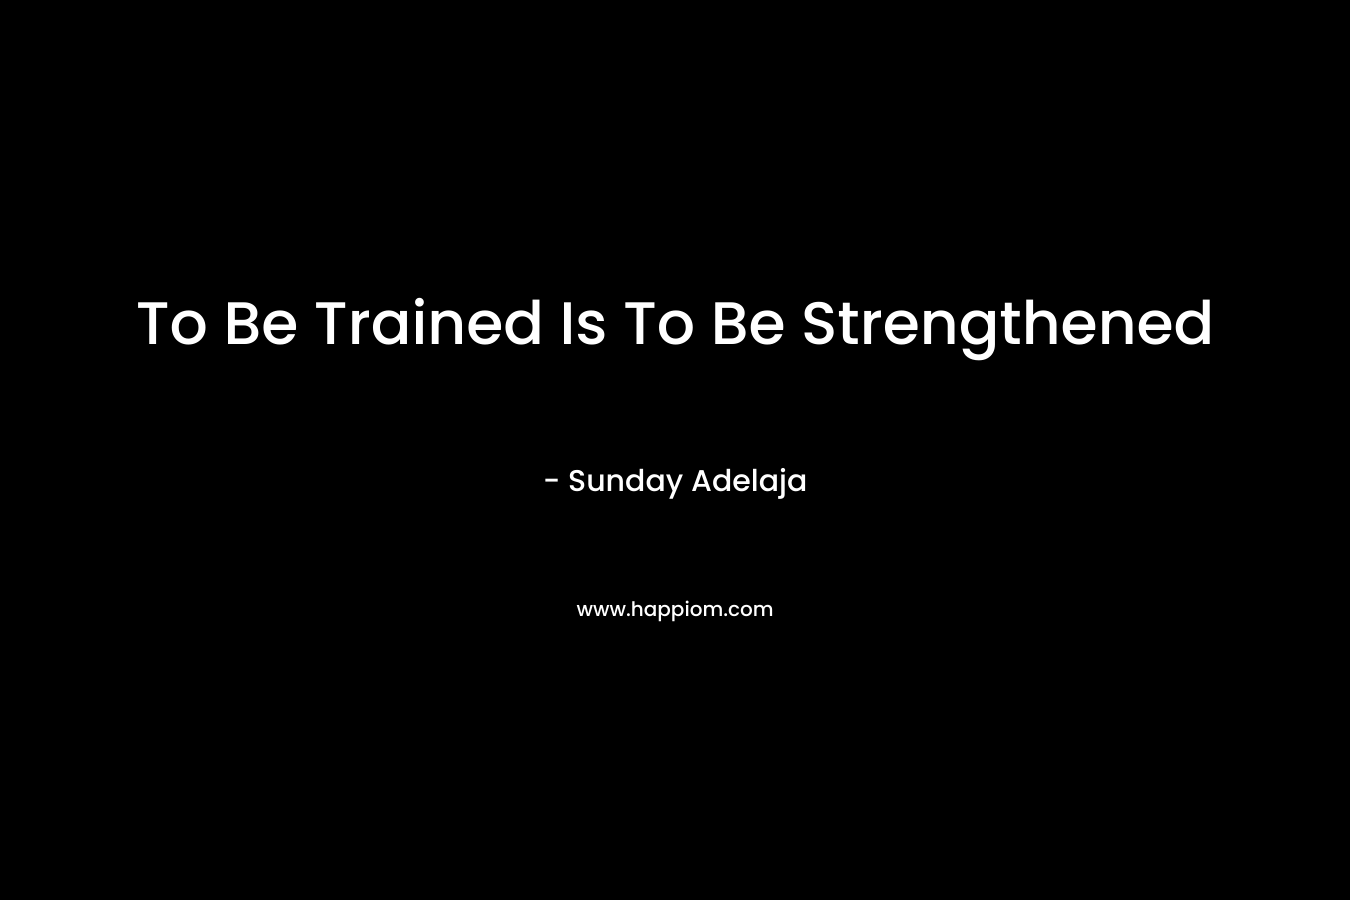 To Be Trained Is To Be Strengthened